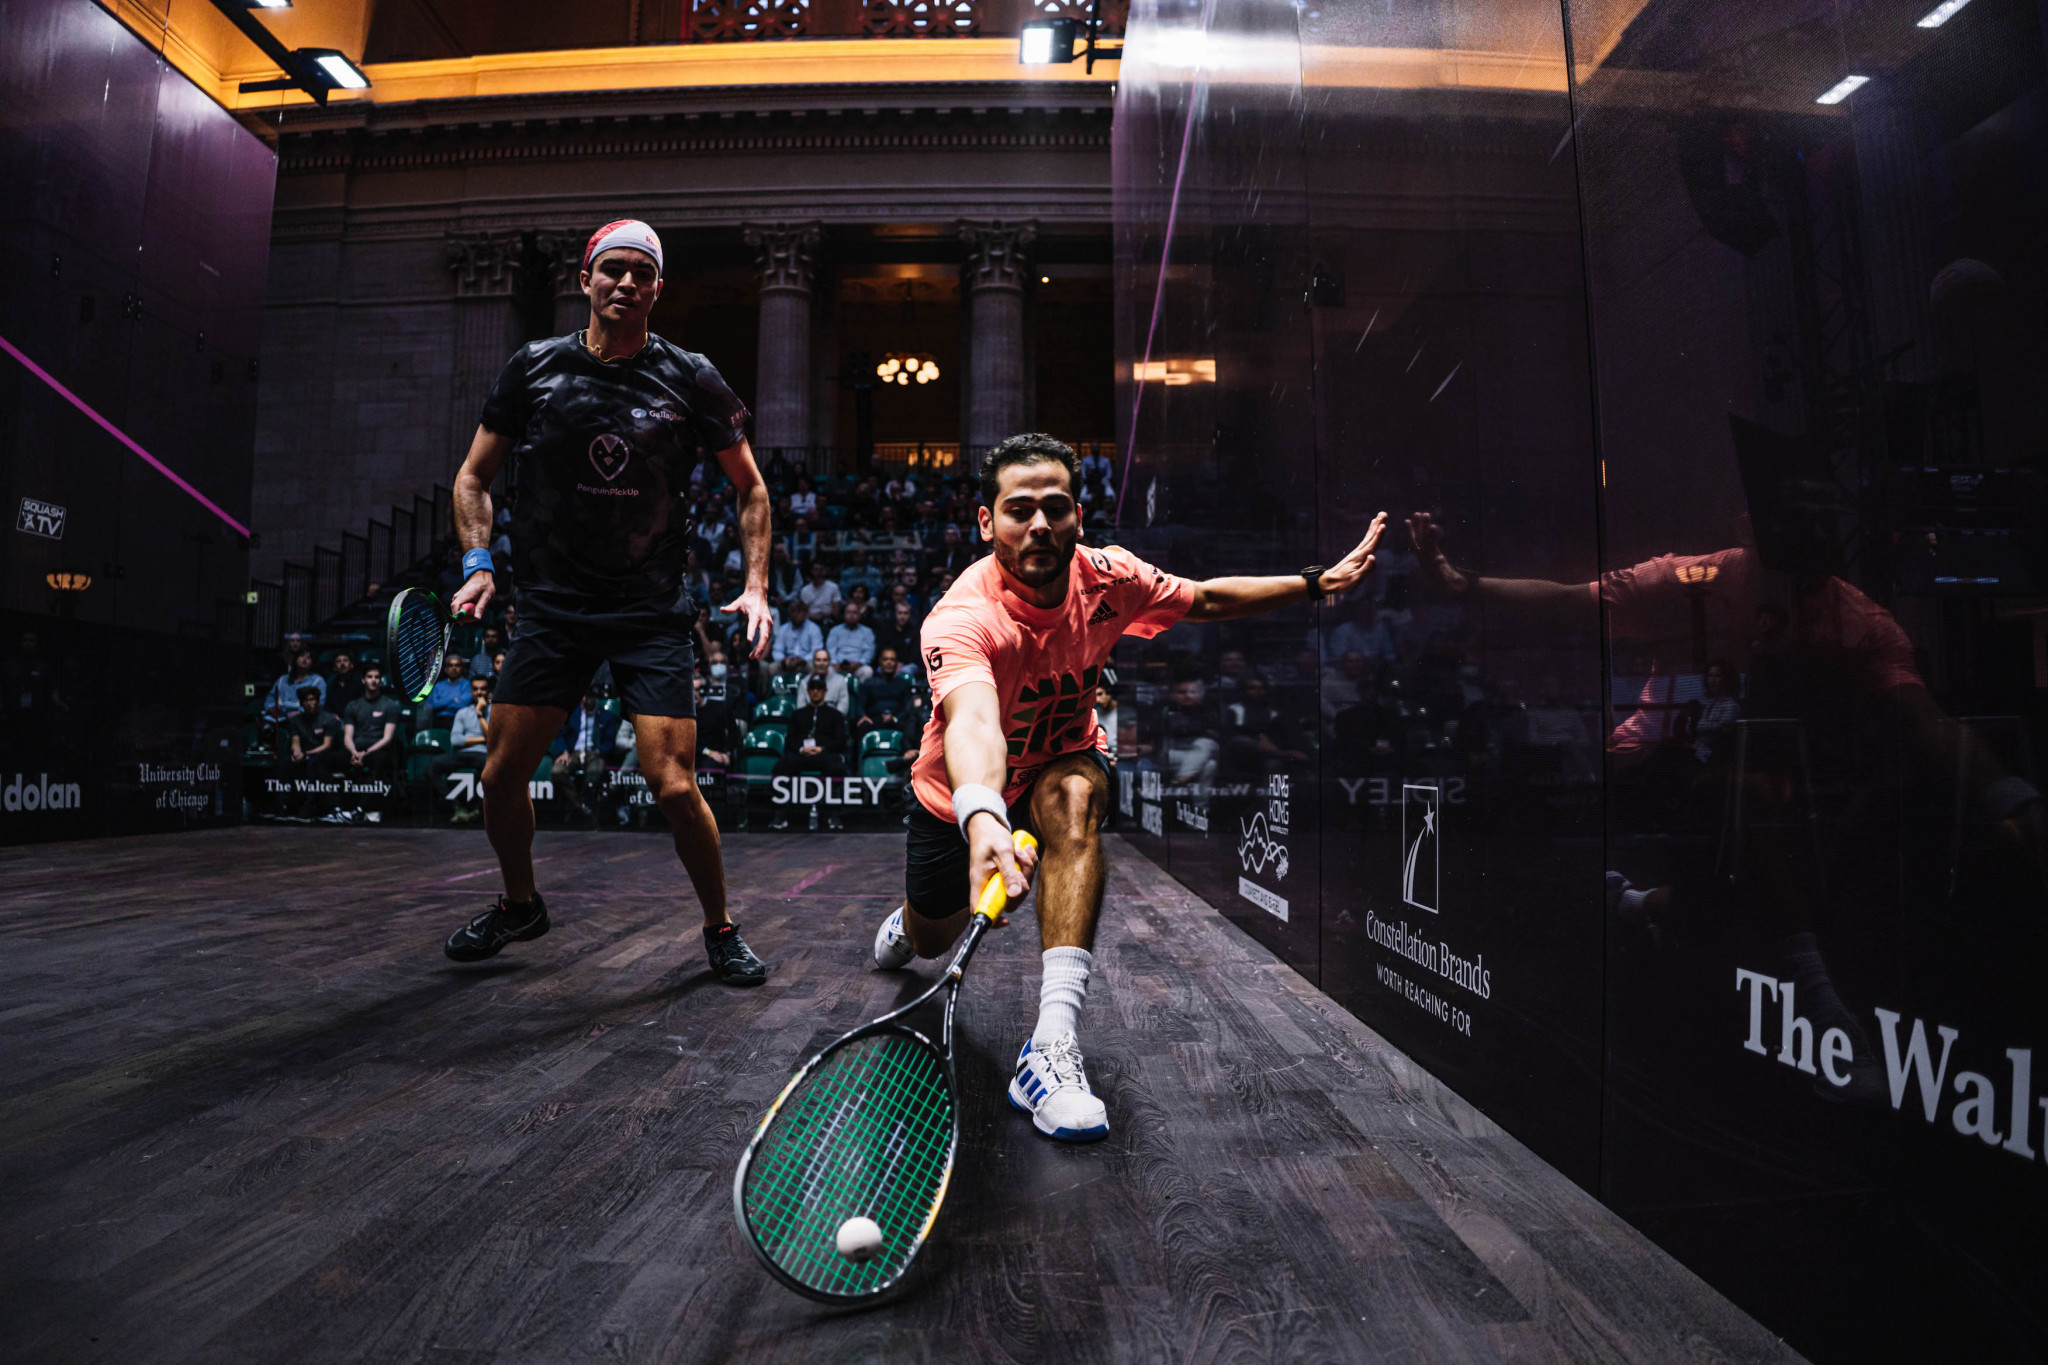 World number one Elias out on dramatic day at World Squash Championships